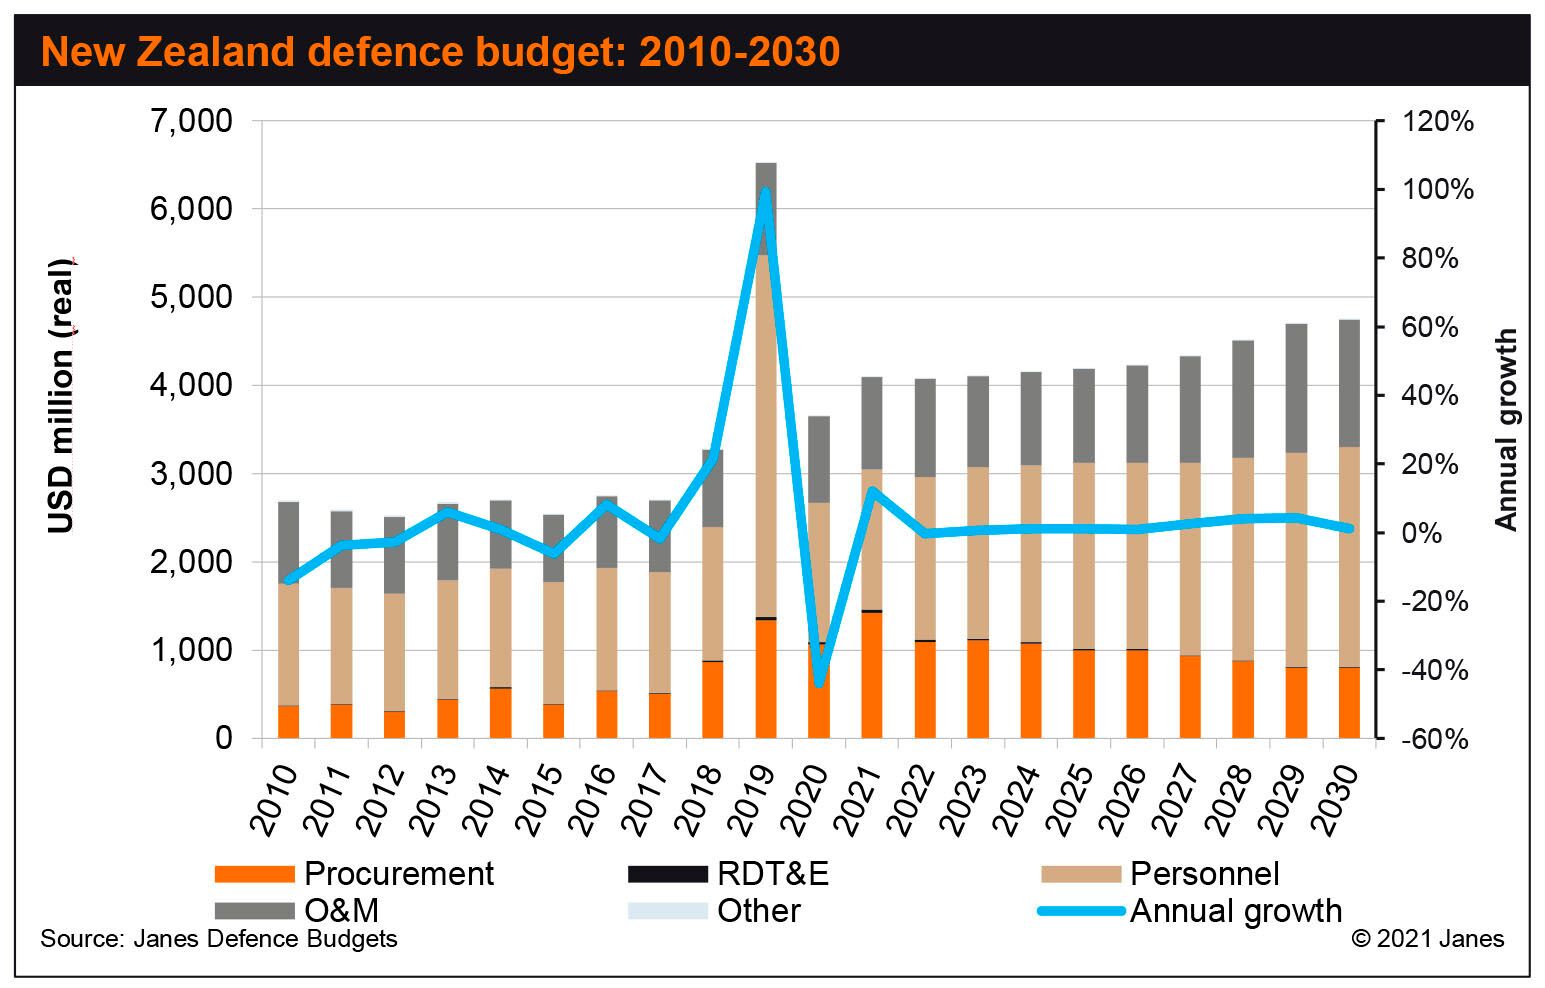 Janes Defence Budgets forecasts modest growth in New Zealand's defence budget over the next few years. (Janes Defence Budgets)